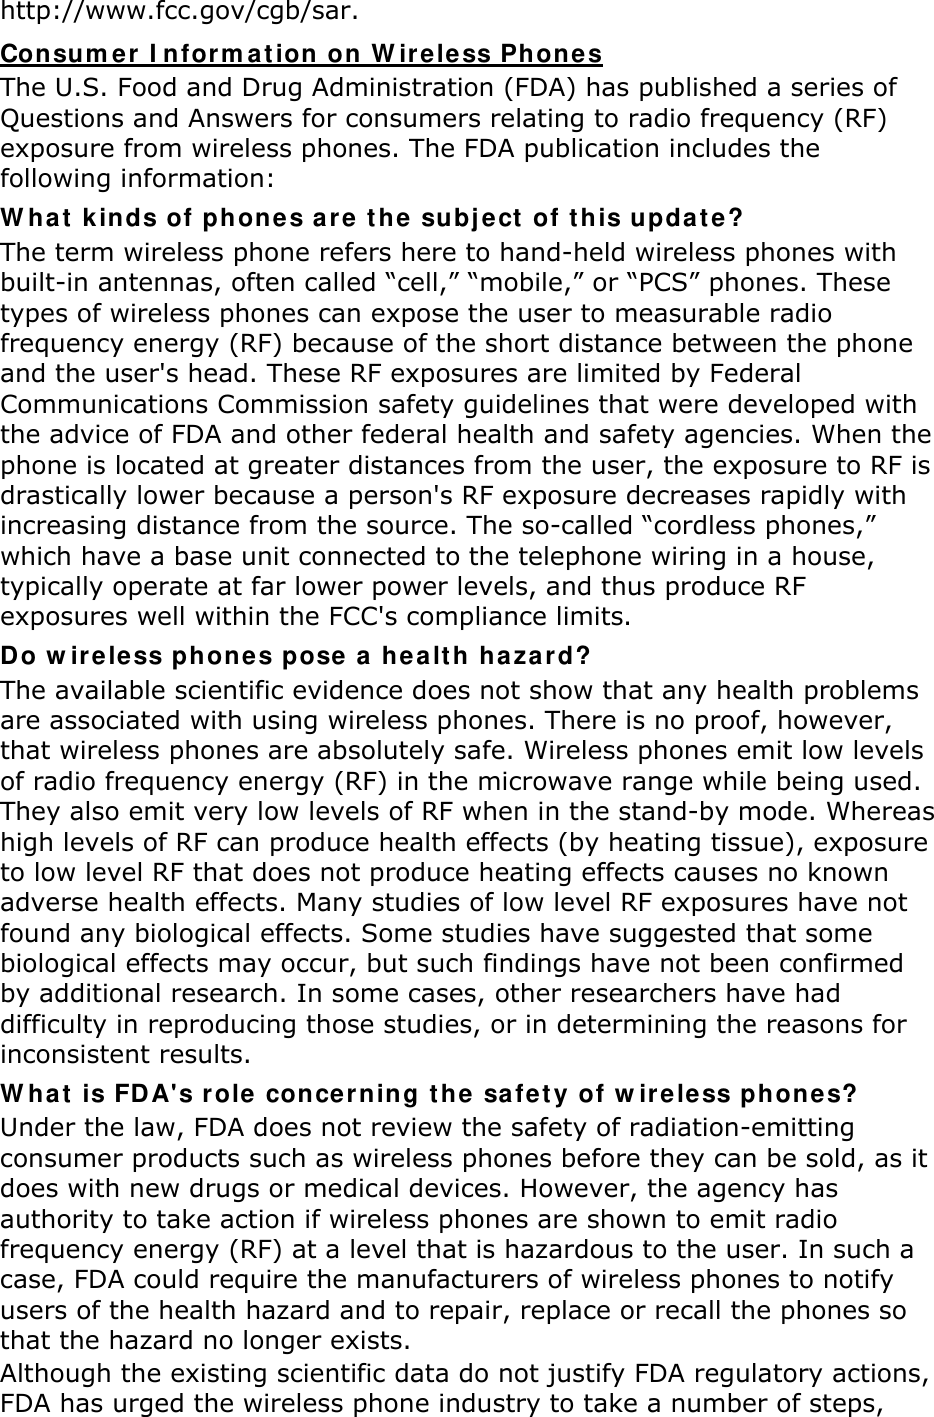 http://www.fcc.gov/cgb/sar. Consumer Information on Wireless Phones The U.S. Food and Drug Administration (FDA) has published a series of Questions and Answers for consumers relating to radio frequency (RF) exposure from wireless phones. The FDA publication includes the following information: What kinds of phones are the subject of this update? The term wireless phone refers here to hand-held wireless phones with built-in antennas, often called “cell,” “mobile,” or “PCS” phones. These types of wireless phones can expose the user to measurable radio frequency energy (RF) because of the short distance between the phone and the user&apos;s head. These RF exposures are limited by Federal Communications Commission safety guidelines that were developed with the advice of FDA and other federal health and safety agencies. When the phone is located at greater distances from the user, the exposure to RF is drastically lower because a person&apos;s RF exposure decreases rapidly with increasing distance from the source. The so-called “cordless phones,” which have a base unit connected to the telephone wiring in a house, typically operate at far lower power levels, and thus produce RF exposures well within the FCC&apos;s compliance limits. Do wireless phones pose a health hazard? The available scientific evidence does not show that any health problems are associated with using wireless phones. There is no proof, however, that wireless phones are absolutely safe. Wireless phones emit low levels of radio frequency energy (RF) in the microwave range while being used. They also emit very low levels of RF when in the stand-by mode. Whereas high levels of RF can produce health effects (by heating tissue), exposure to low level RF that does not produce heating effects causes no known adverse health effects. Many studies of low level RF exposures have not found any biological effects. Some studies have suggested that some biological effects may occur, but such findings have not been confirmed by additional research. In some cases, other researchers have had difficulty in reproducing those studies, or in determining the reasons for inconsistent results. What is FDA&apos;s role concerning the safety of wireless phones? Under the law, FDA does not review the safety of radiation-emitting consumer products such as wireless phones before they can be sold, as it does with new drugs or medical devices. However, the agency has authority to take action if wireless phones are shown to emit radio frequency energy (RF) at a level that is hazardous to the user. In such a case, FDA could require the manufacturers of wireless phones to notify users of the health hazard and to repair, replace or recall the phones so that the hazard no longer exists. Although the existing scientific data do not justify FDA regulatory actions, FDA has urged the wireless phone industry to take a number of steps, 